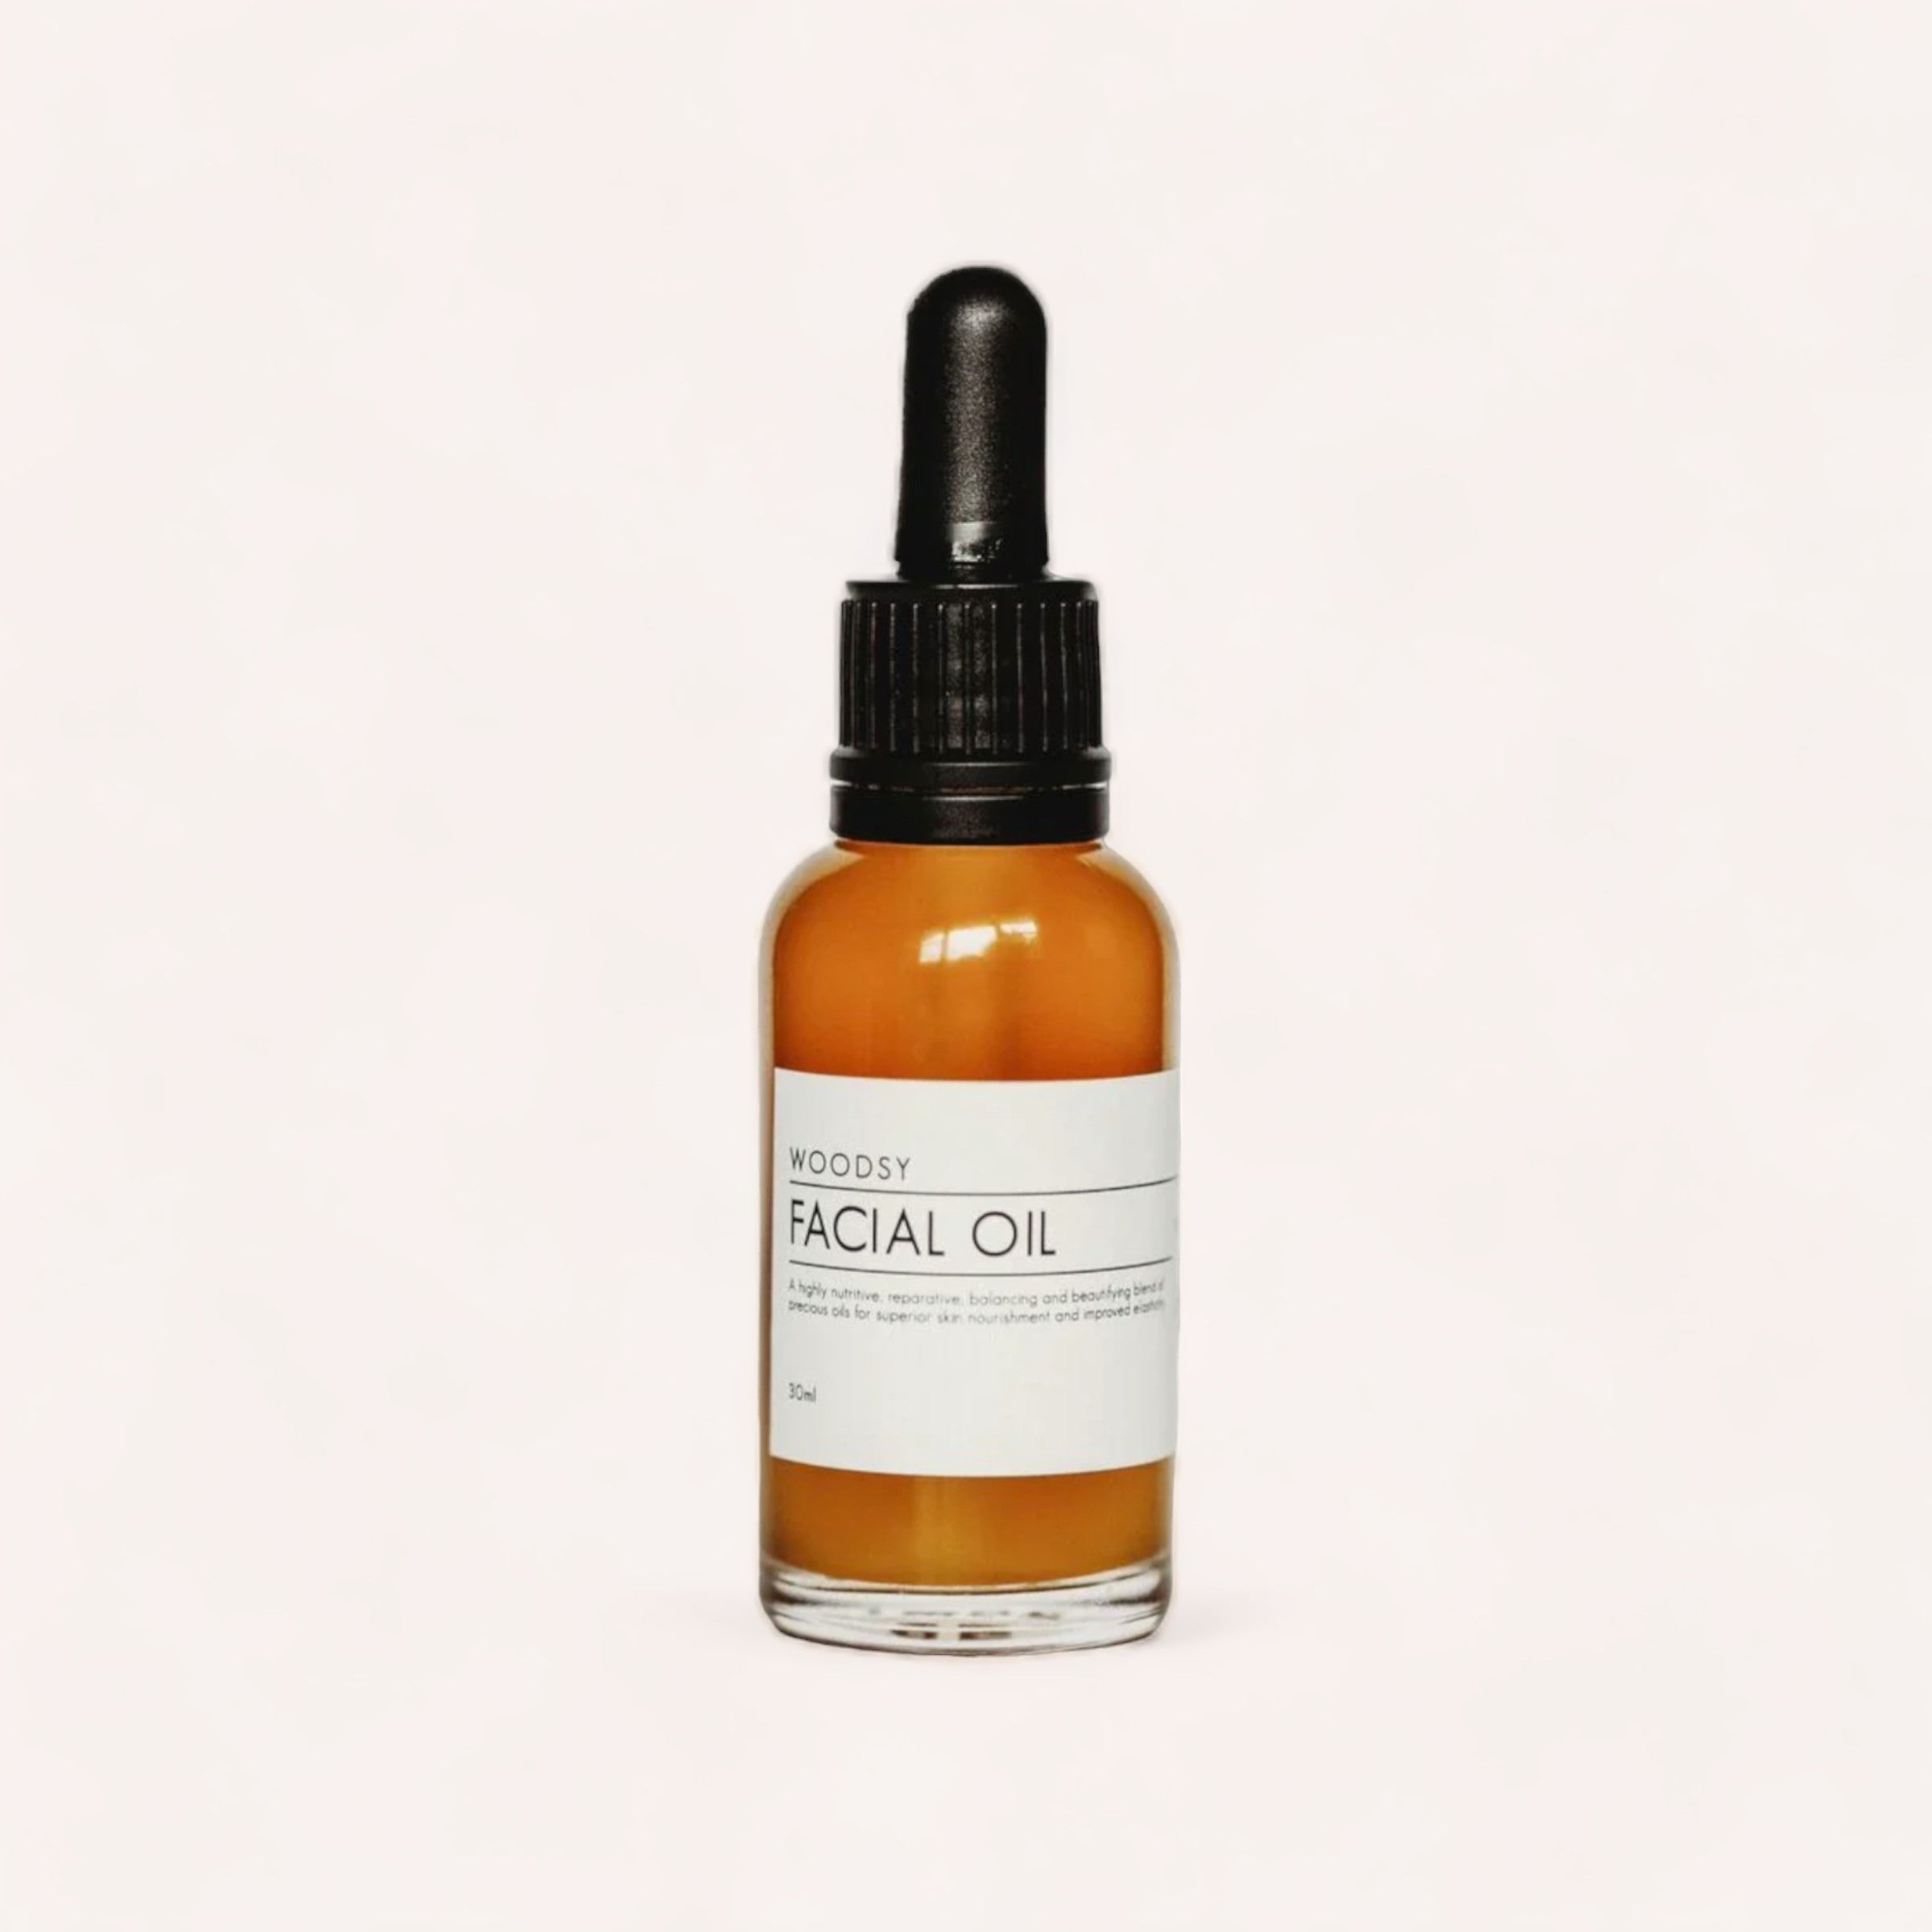 A dropper bottle of Facial Oil by Woodsy Botanics infused with hyaluronic acid, designed to address signs of ageing, features a "woodsy" label presented against a clean, white background.